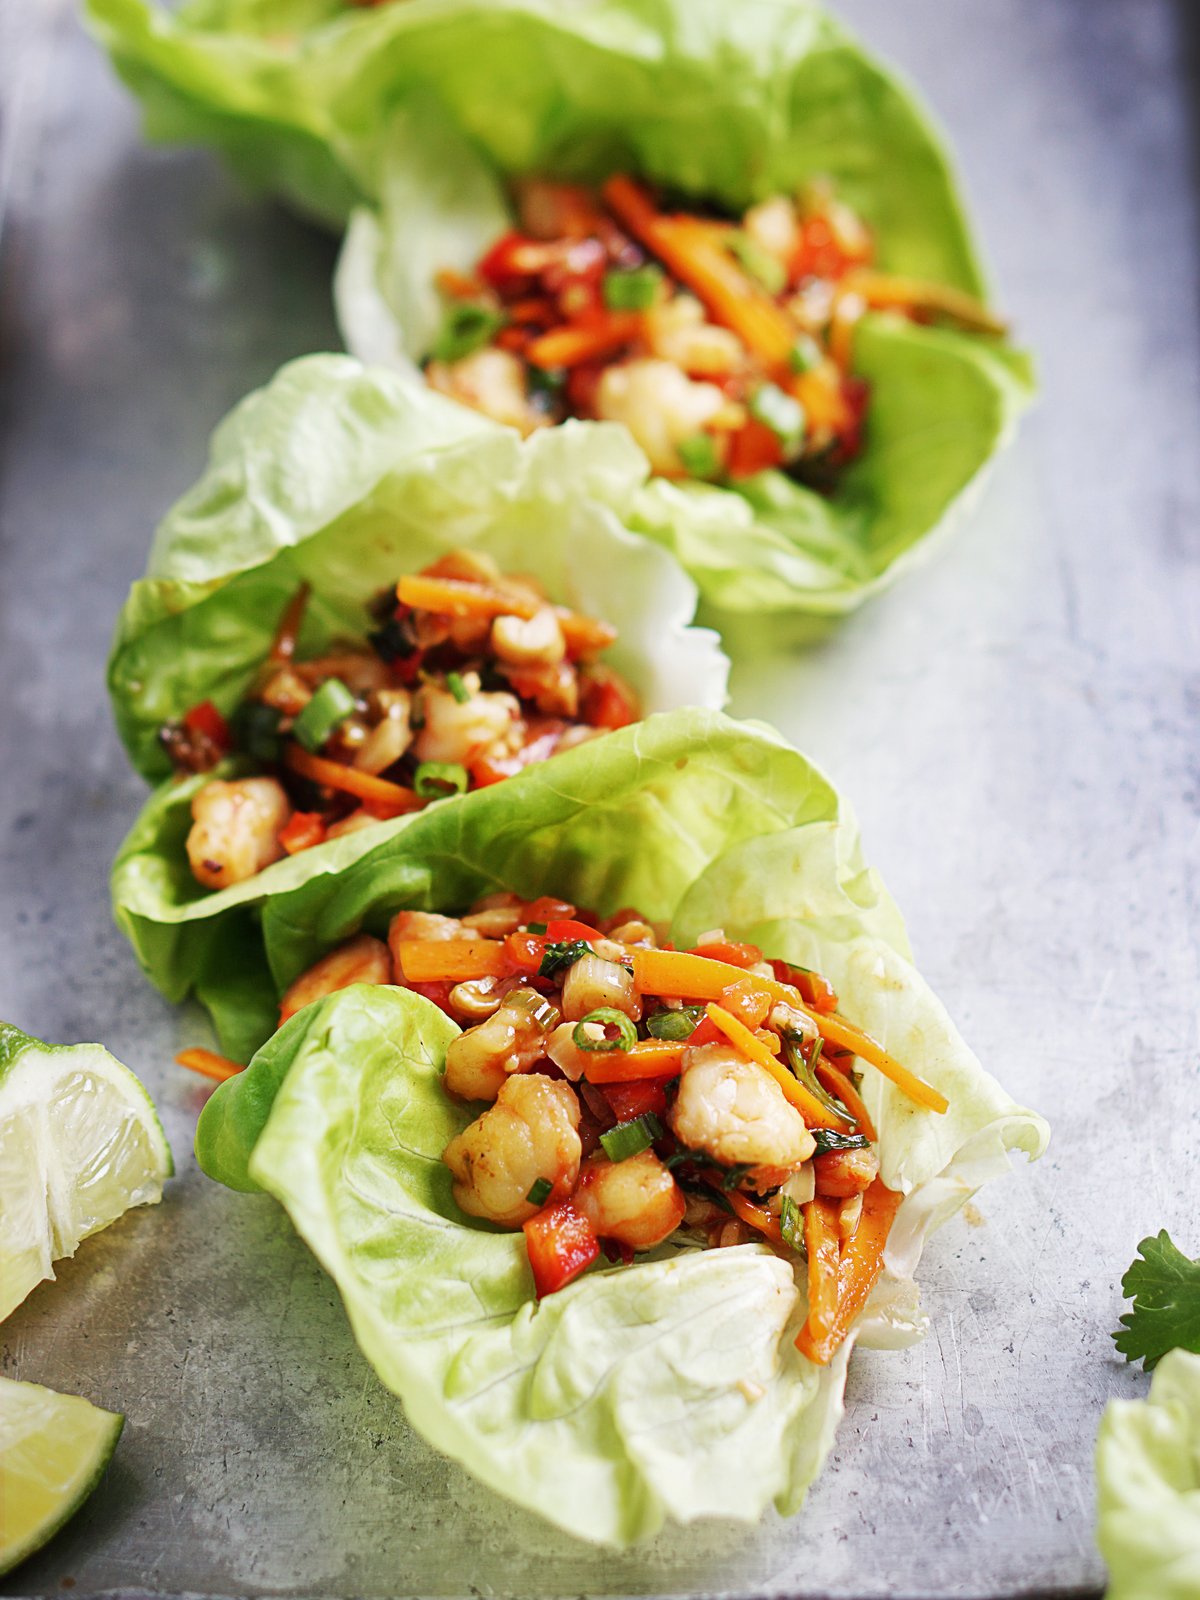 Lettuce wraps filled with Asian shrimp and vegetables